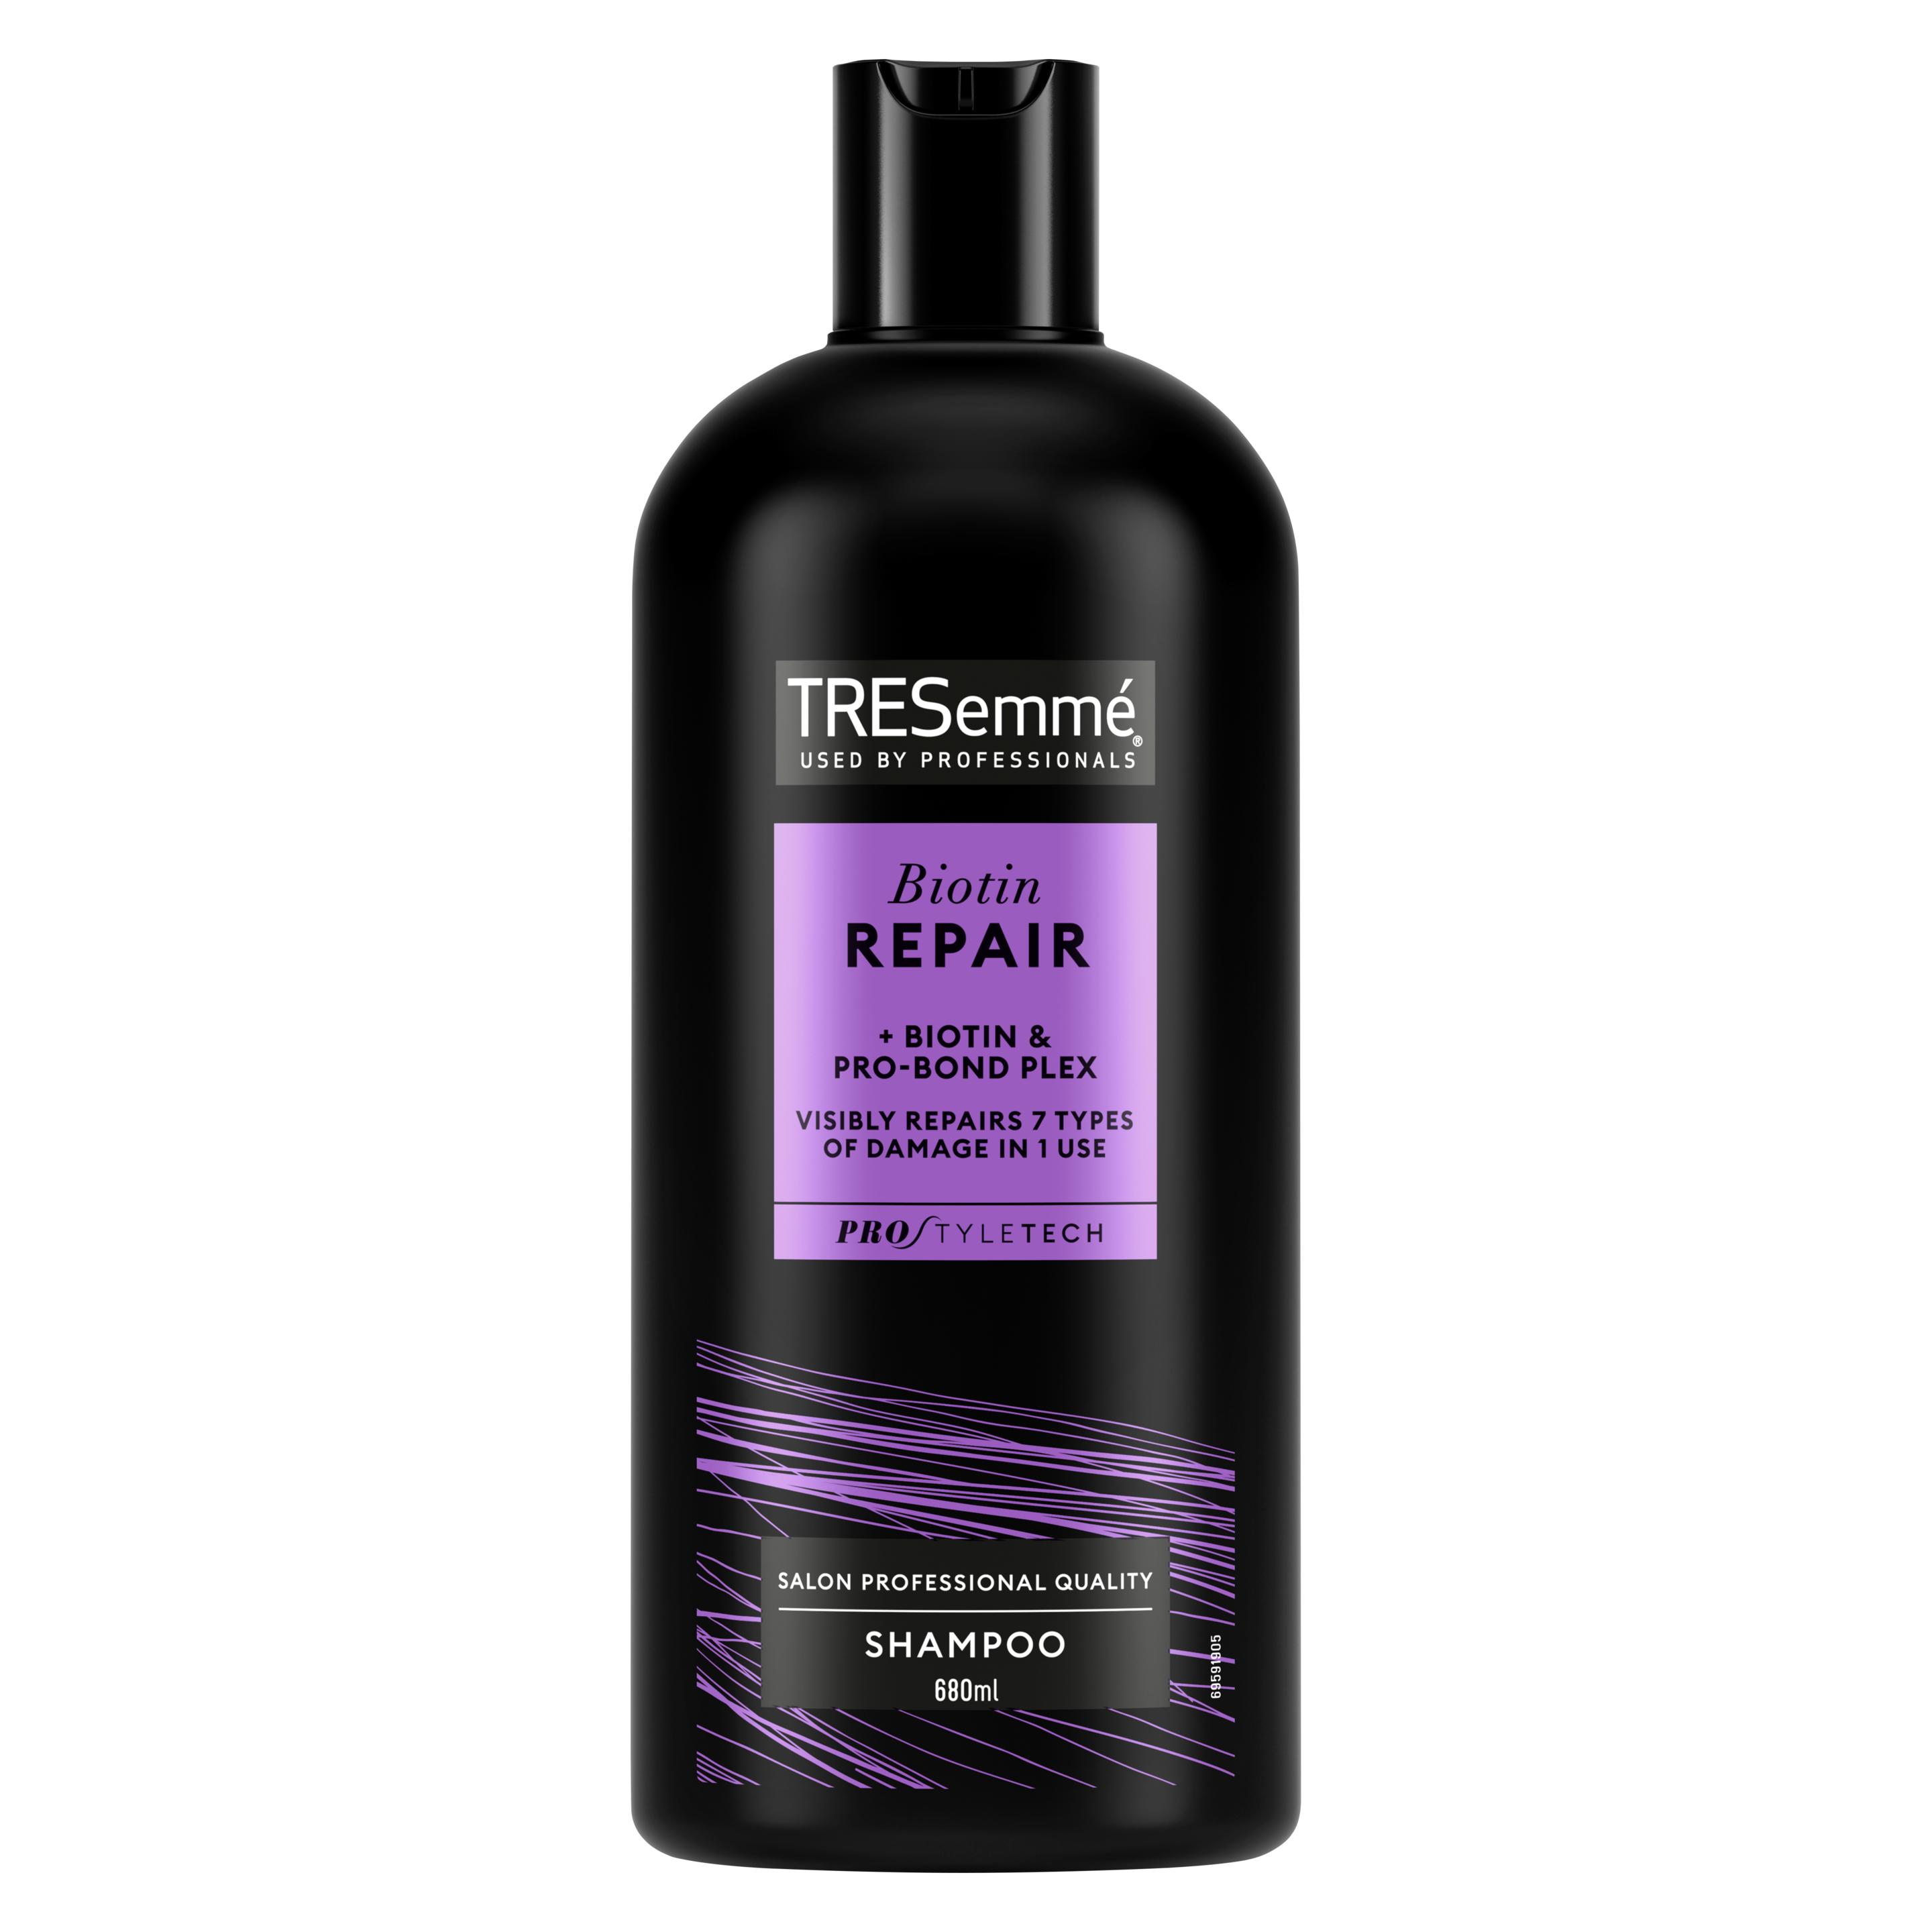 TRESemme  Biotin Repair visibly repairs 7 types of damage in 1 use Shampoo for dry, damaged hair 680 ml